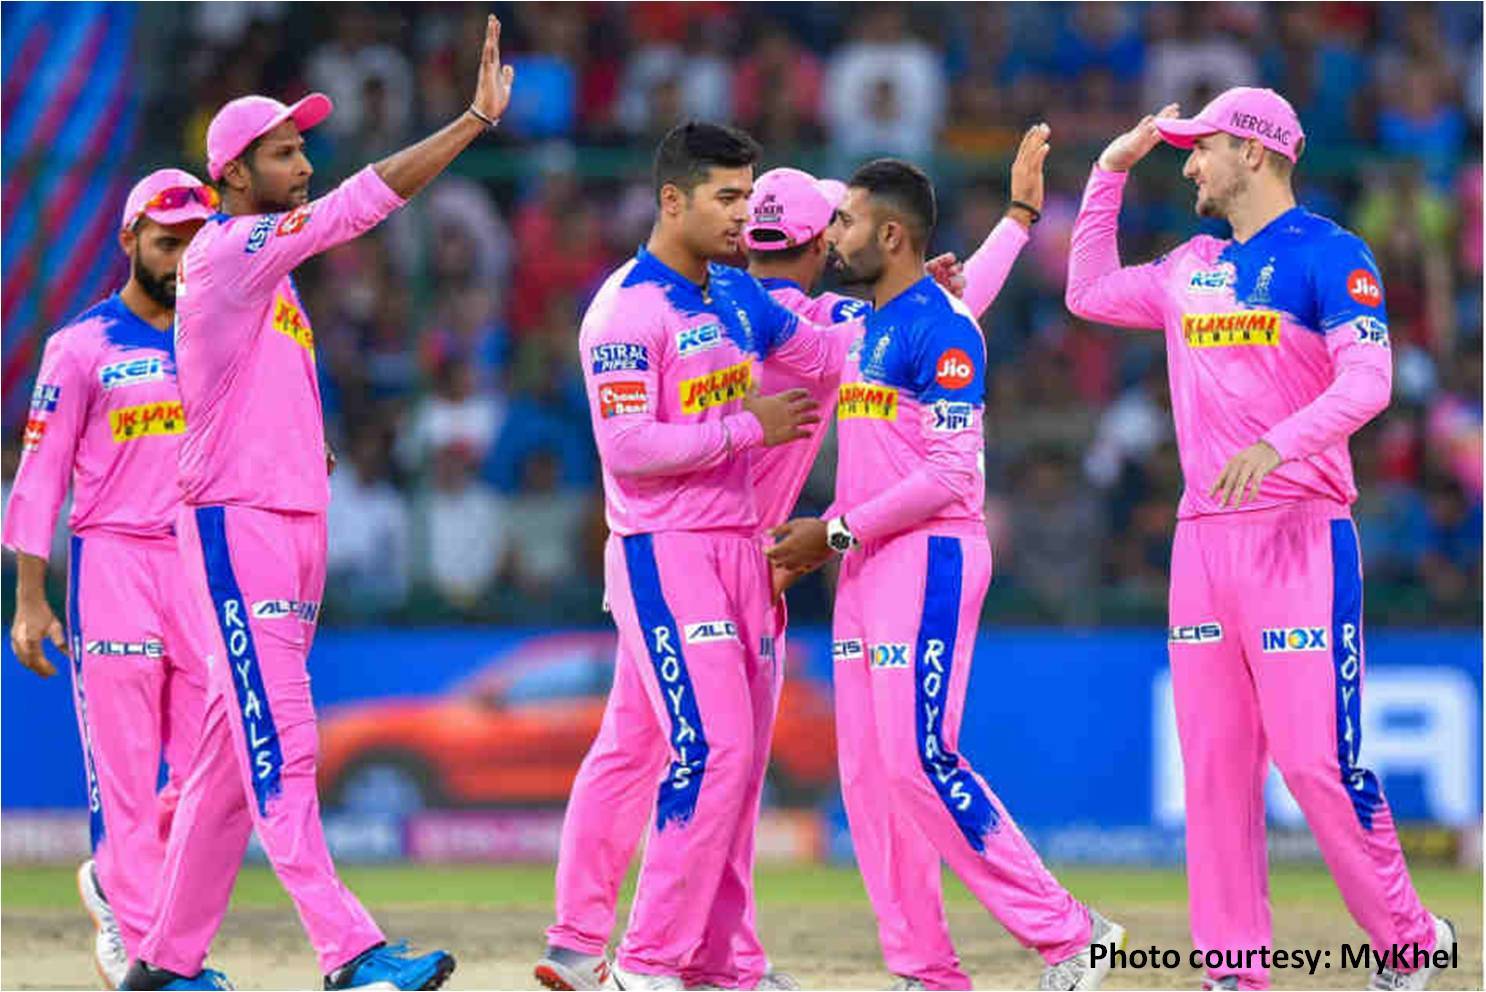 Rajasthan Royals - Strengths and Weaknesses | IPL 2020